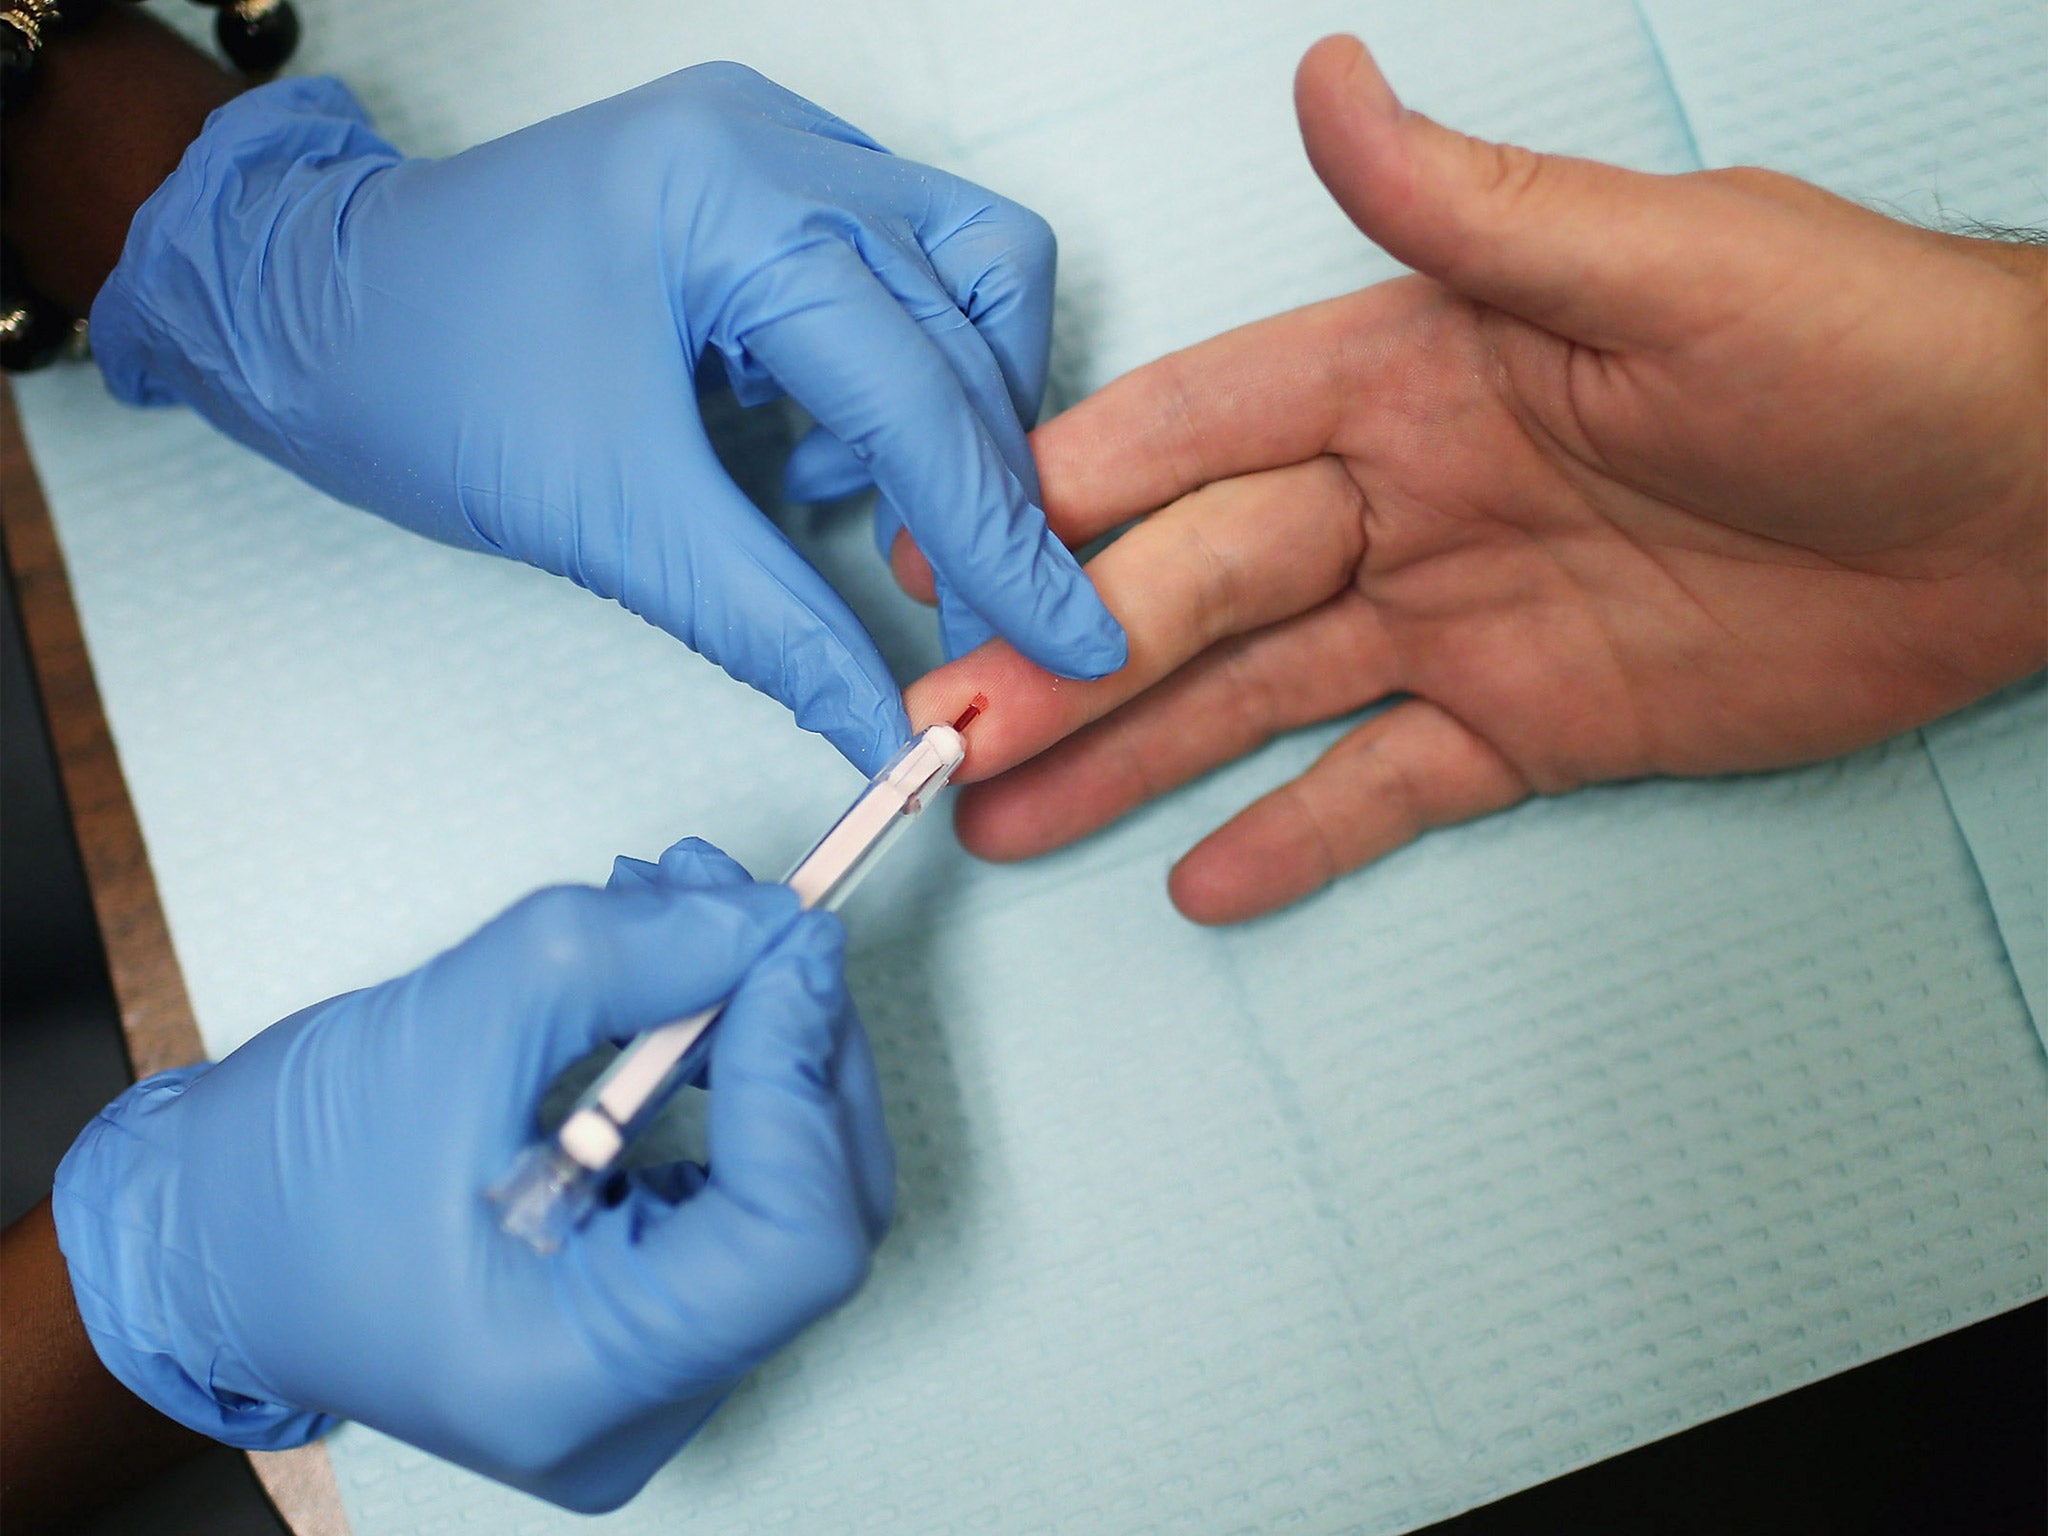 An HIV test is carried out. An Aids vaccine is now a distinct possibility in the future 